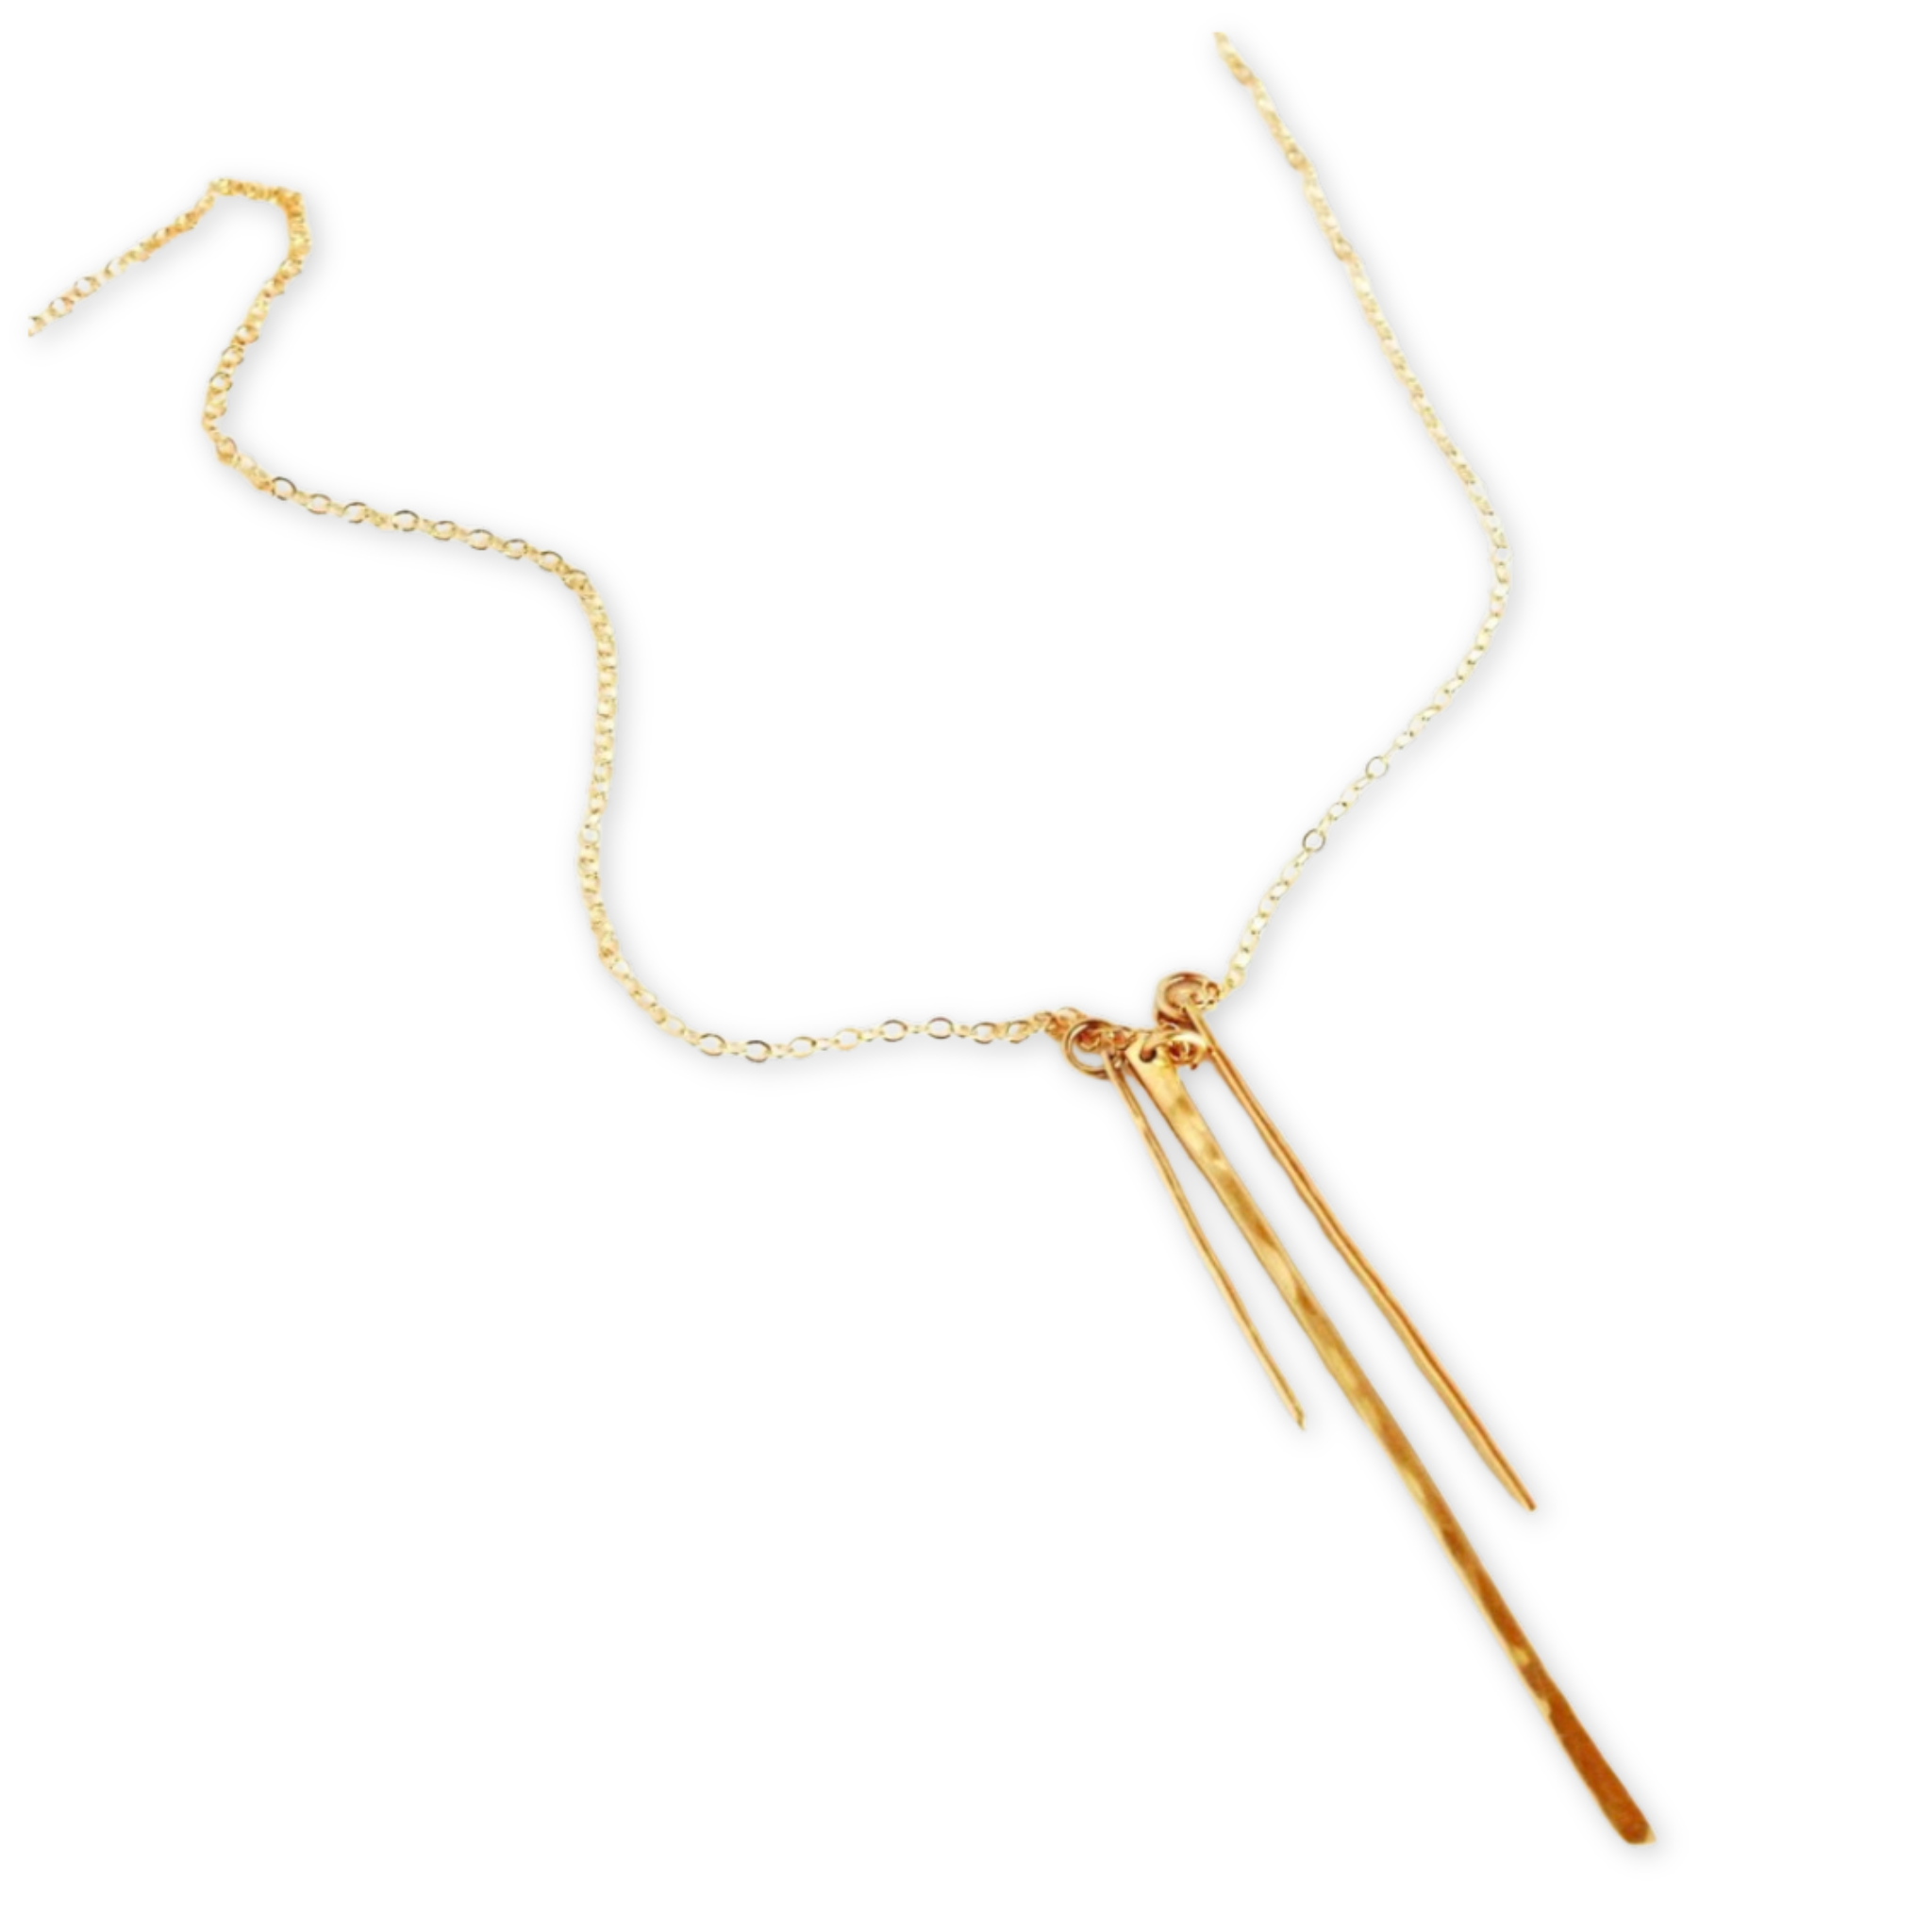 necklace with three long thin hammered stick pendants on a thin chain